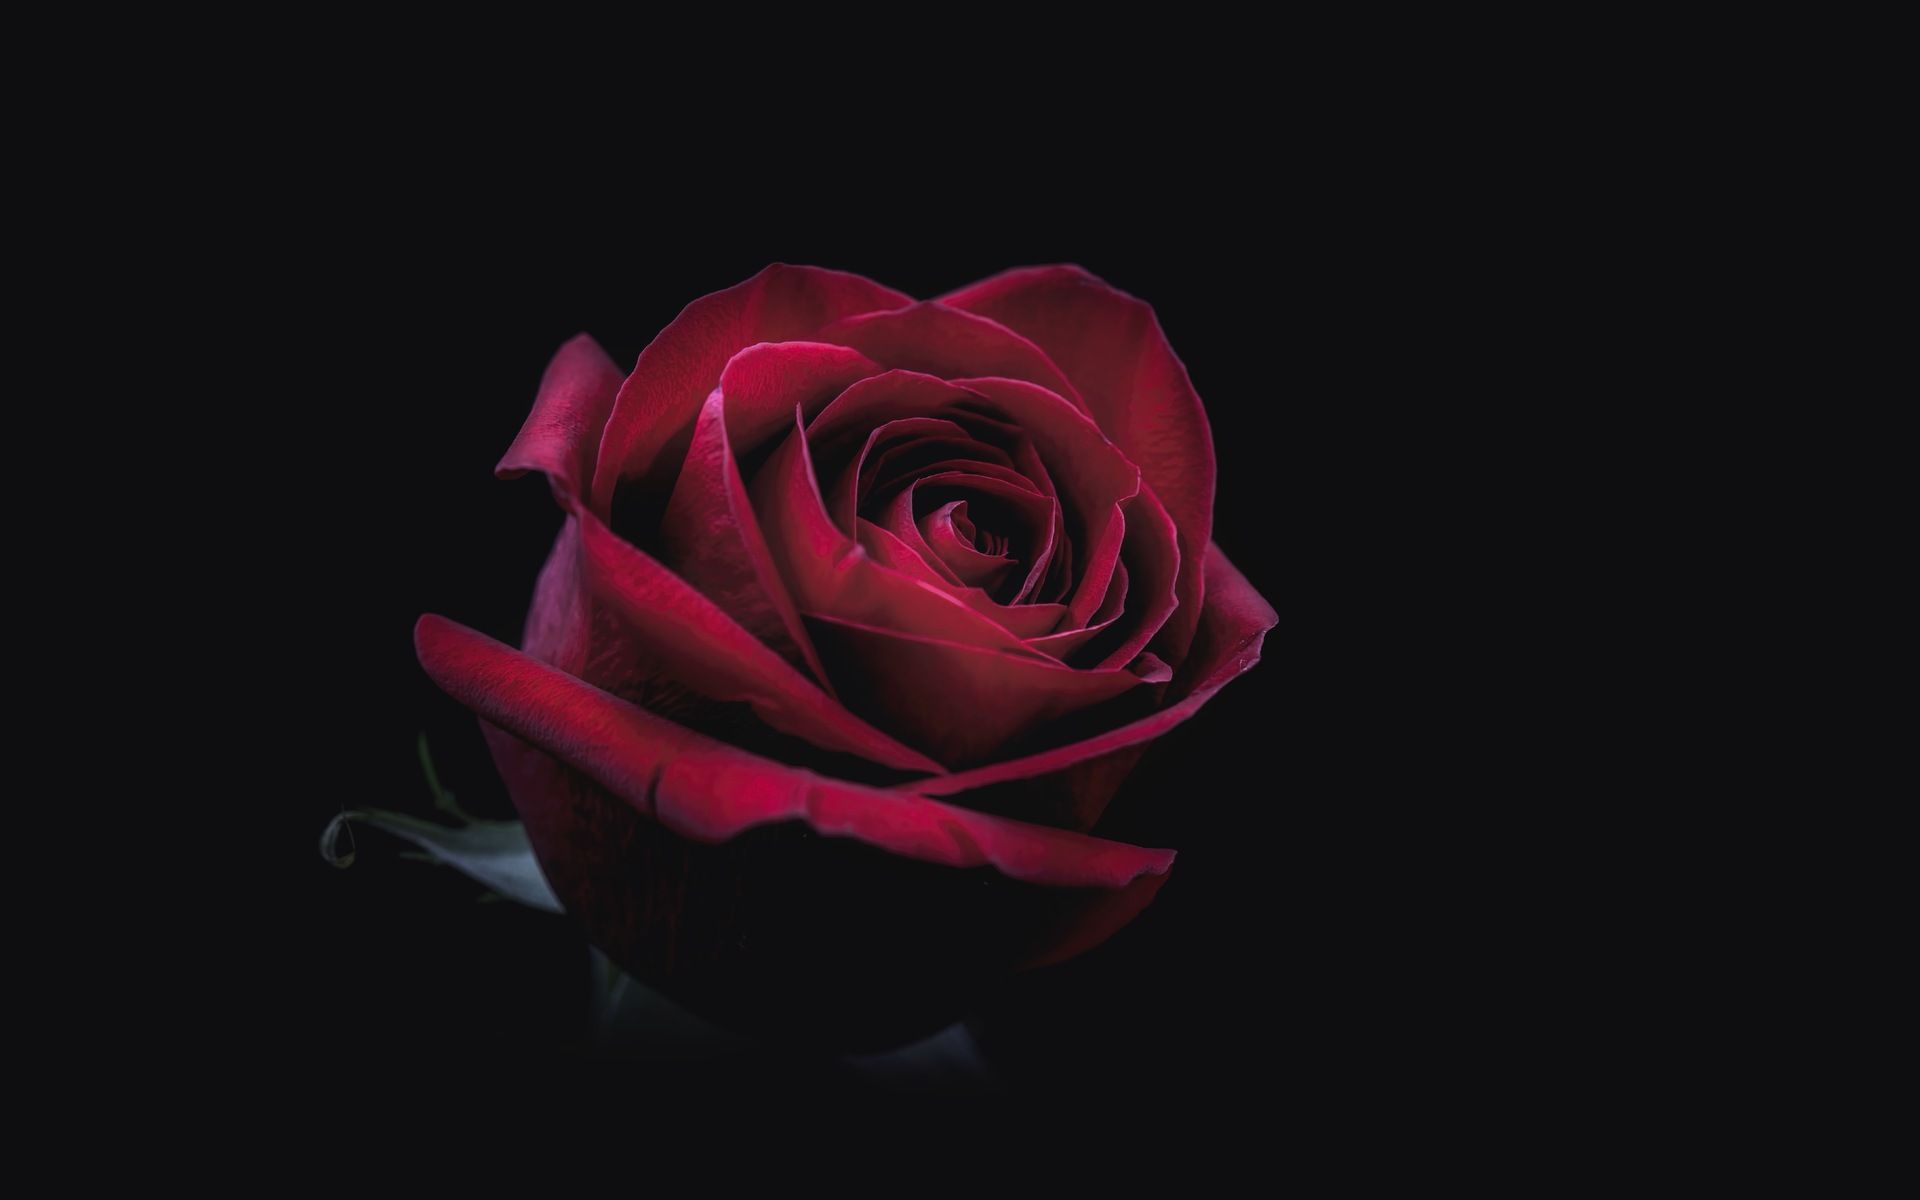 Rose Oled 8k 1080P Resolution HD 4k Wallpaper, Image, Background, Photo and Picture